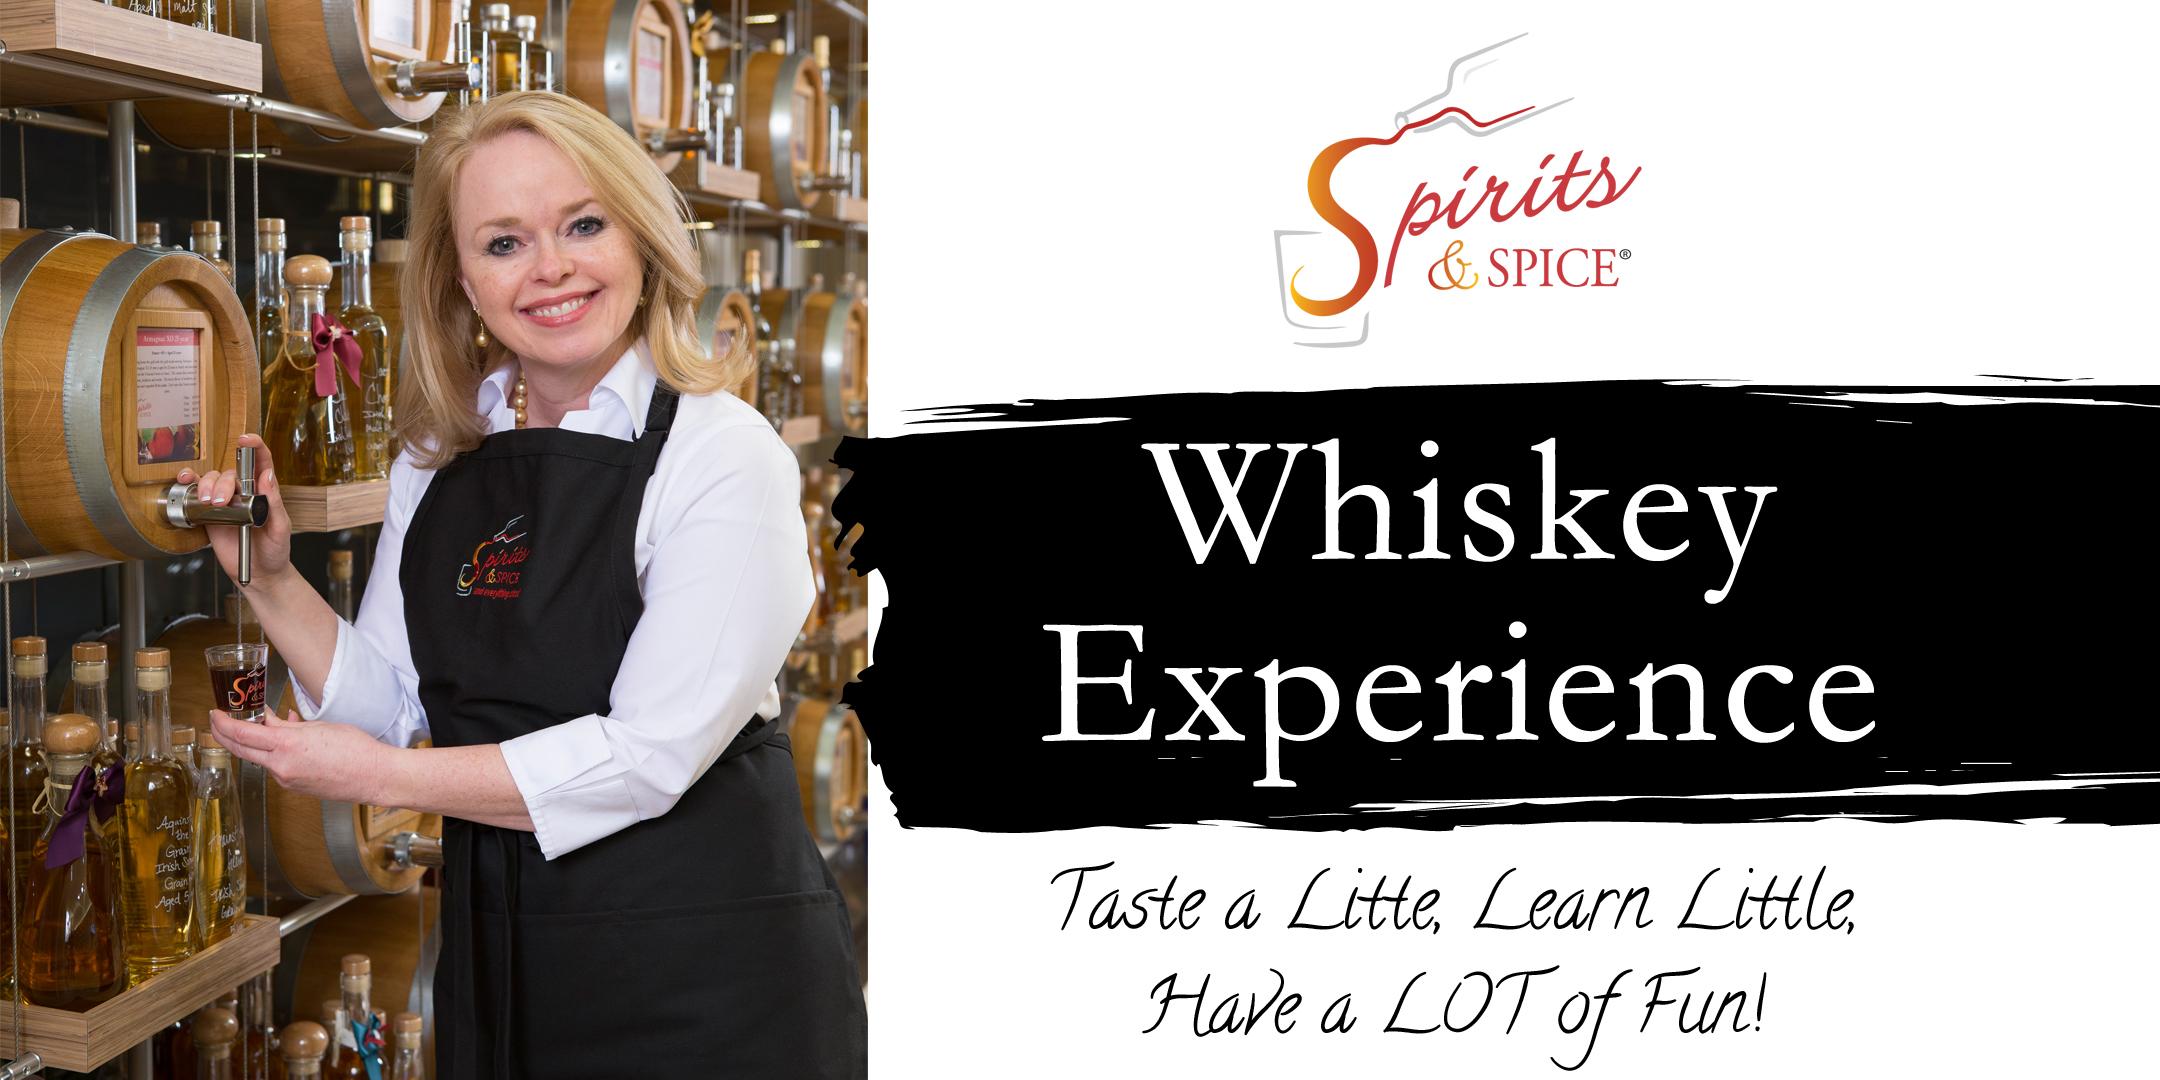 Spirits & Spice Whiskey Experience